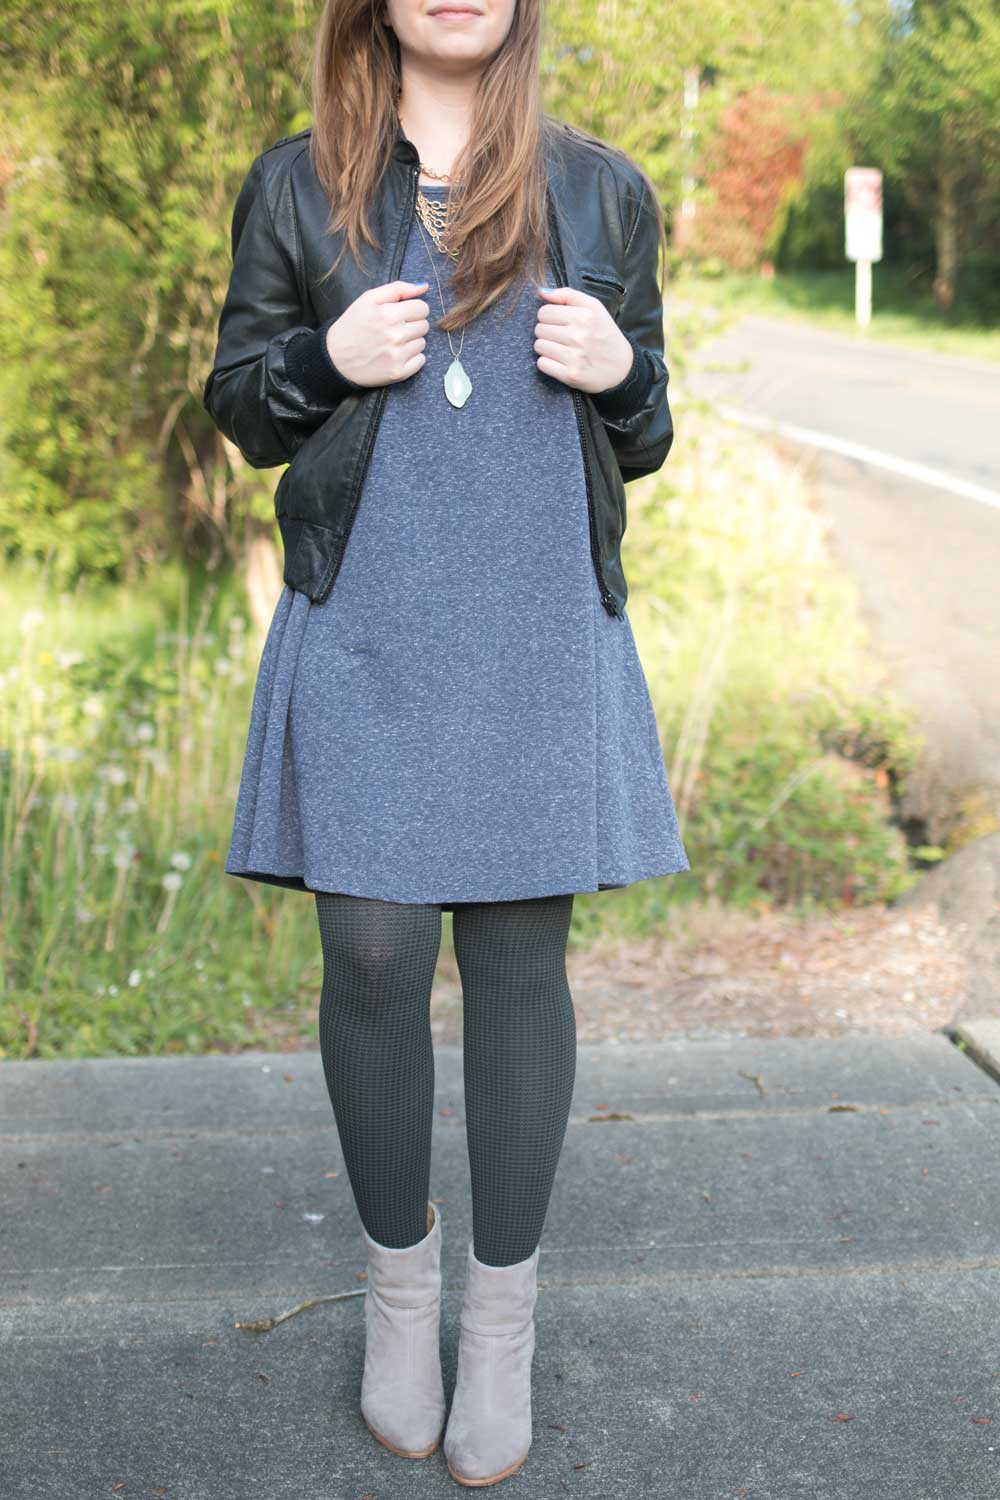 https://www.hellorigby.com/wp-content/uploads/2015/04/patterened-tia-tights-outfit-with-swing-dress.jpg